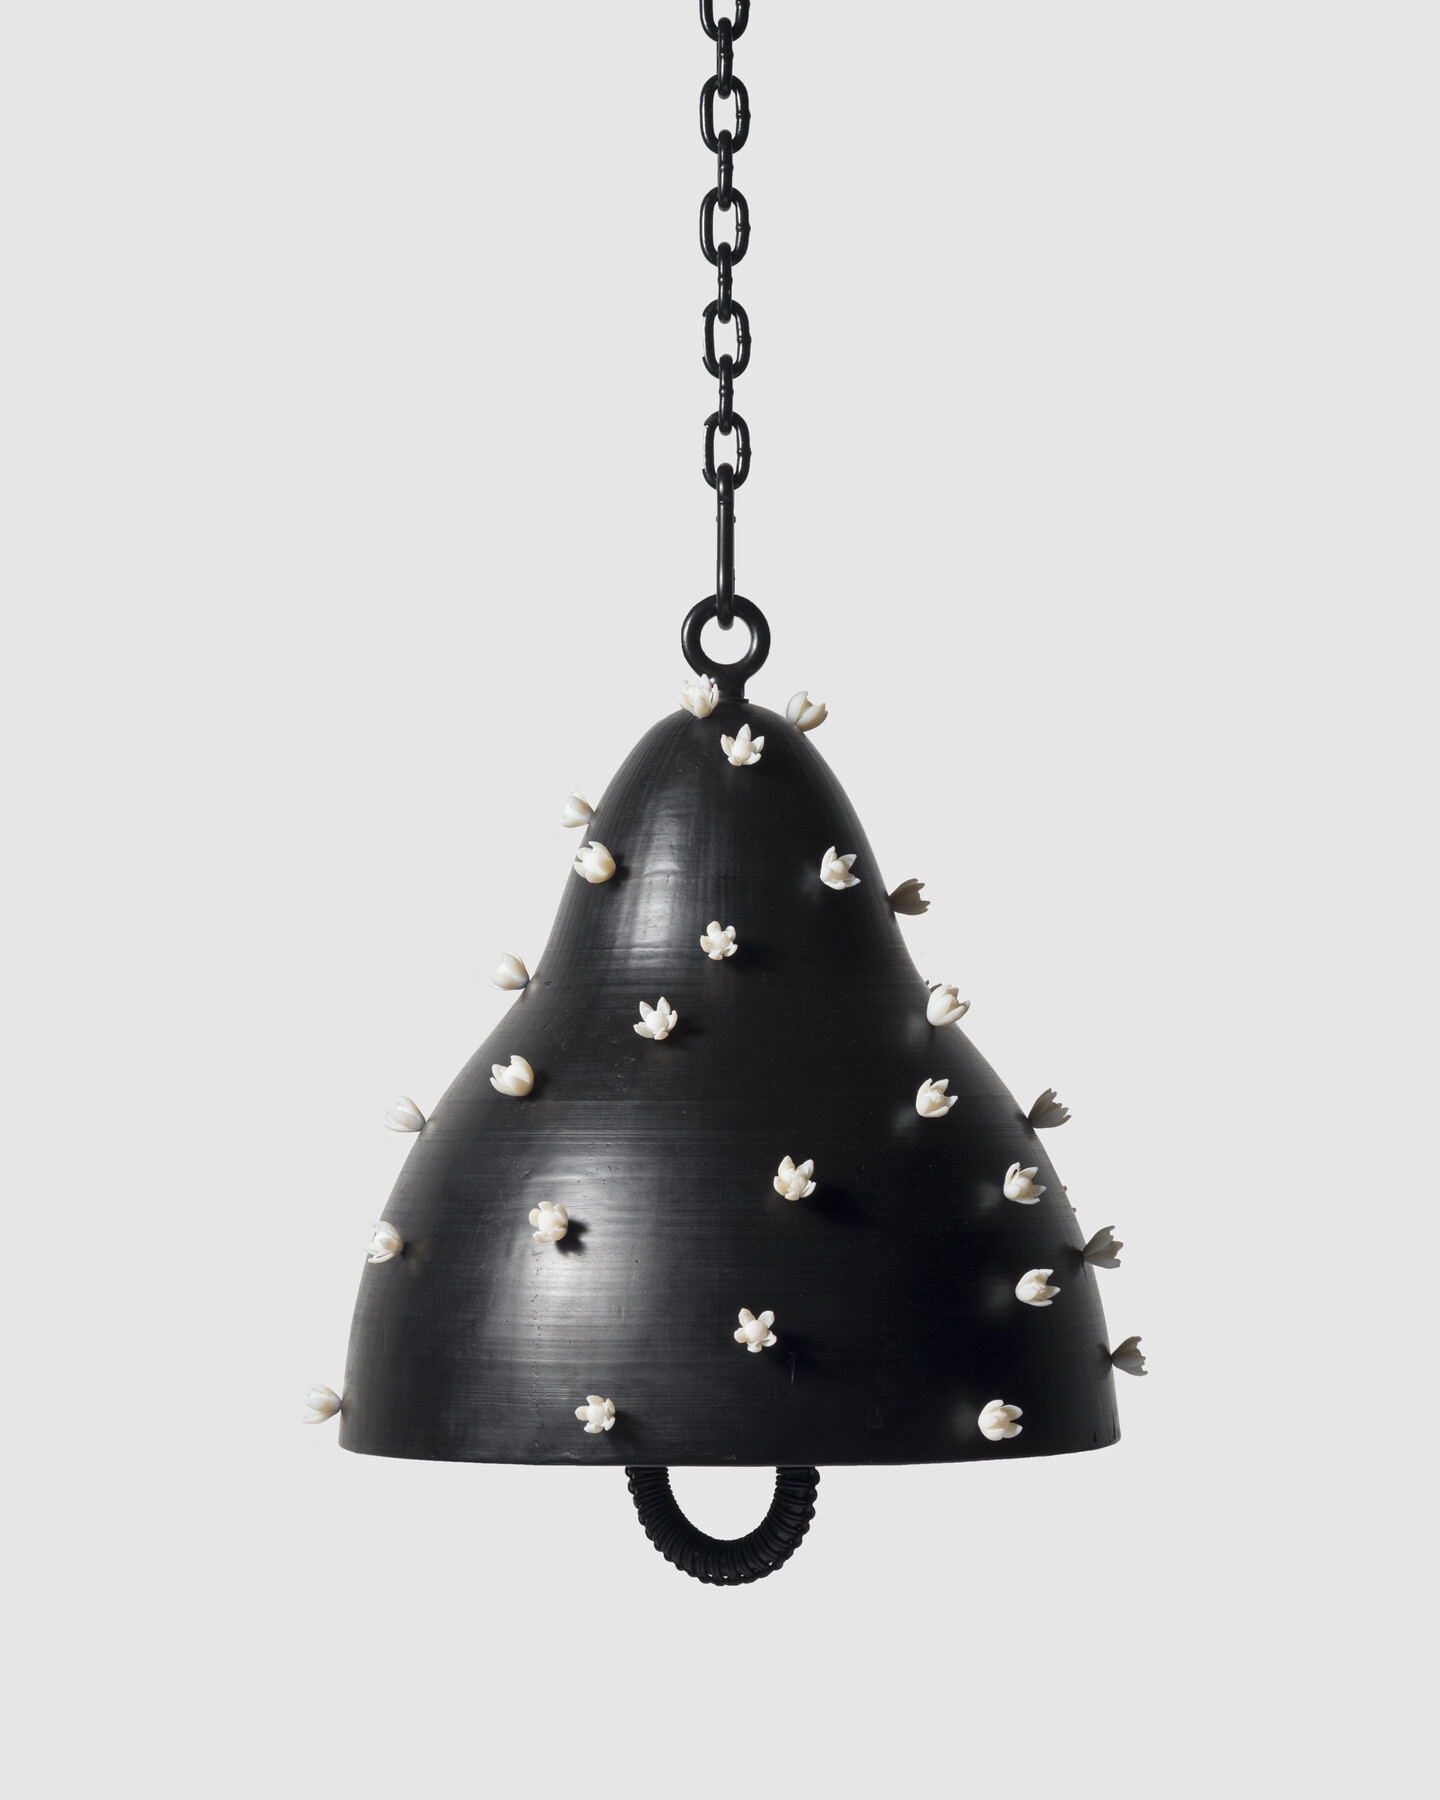 A black bell covered in three-dimensional white flowers with a black clapper, hanging from a black chain.